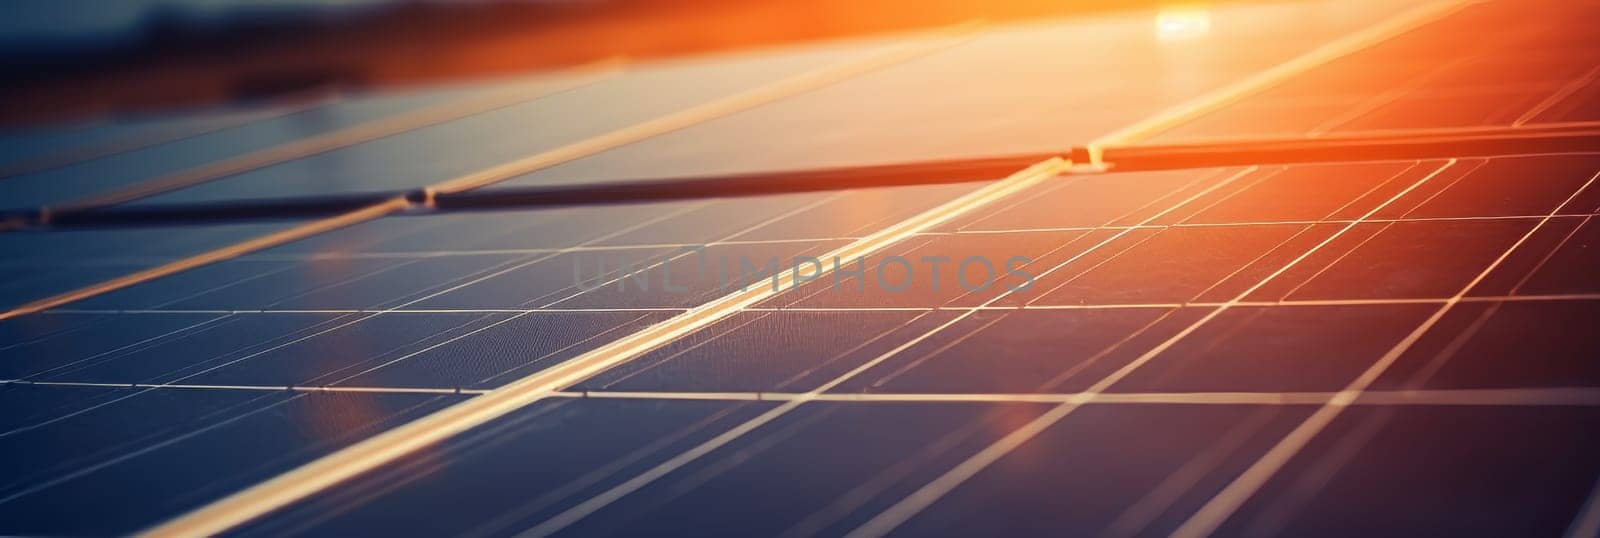 Close-up solar panels on house roof for energy saving and alternative electricity source. by Annu1tochka